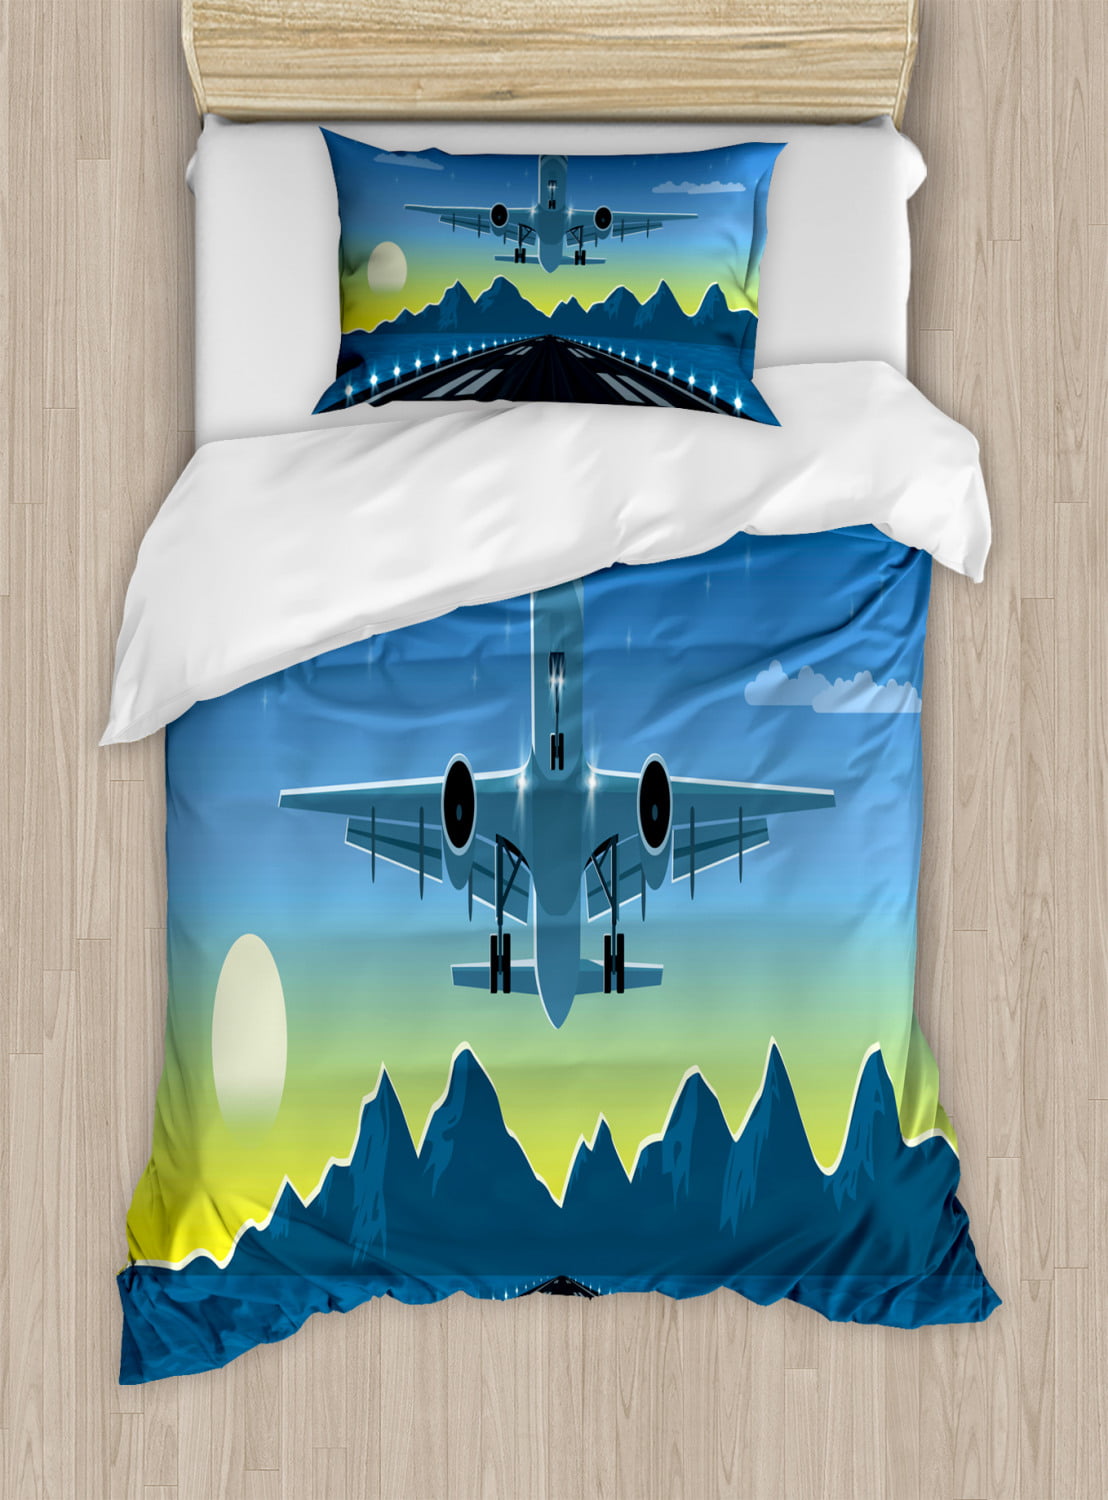 Airport Duvet Cover Set Twin Size, Plane Twin Bed